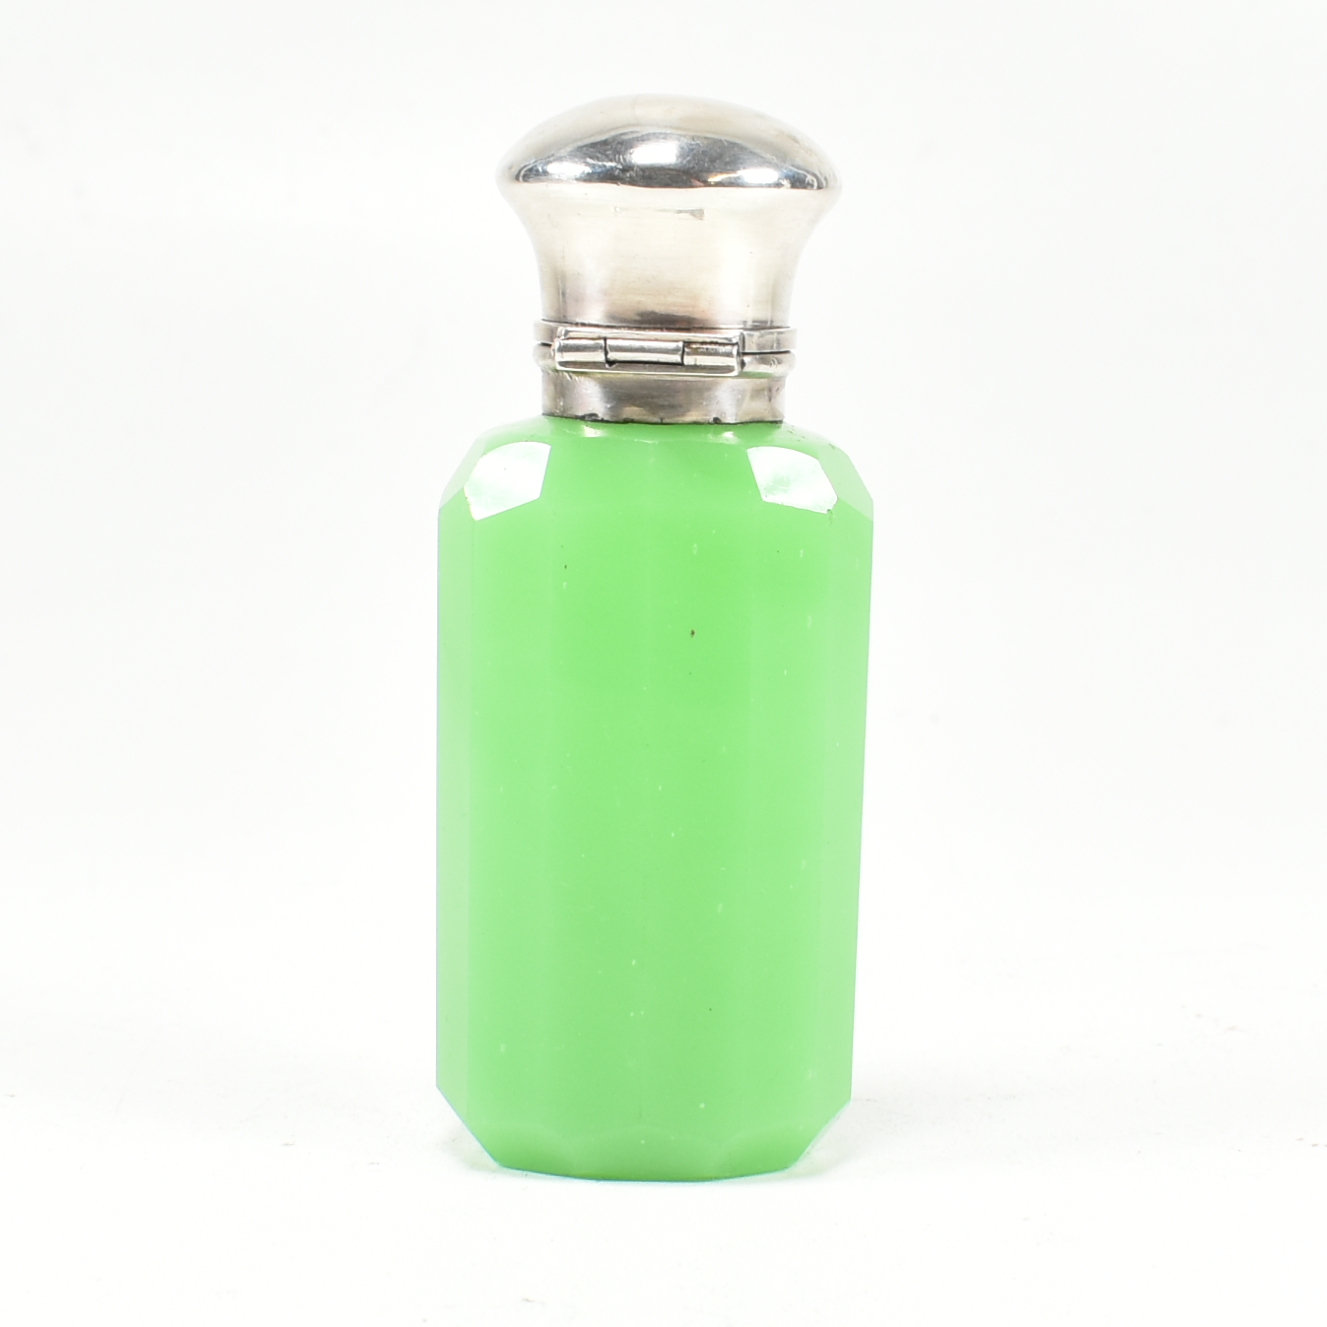 EARLY 20TH CENTURY WHITE METAL & URANIUM GLASS SCENT BOTTLE - Image 3 of 9